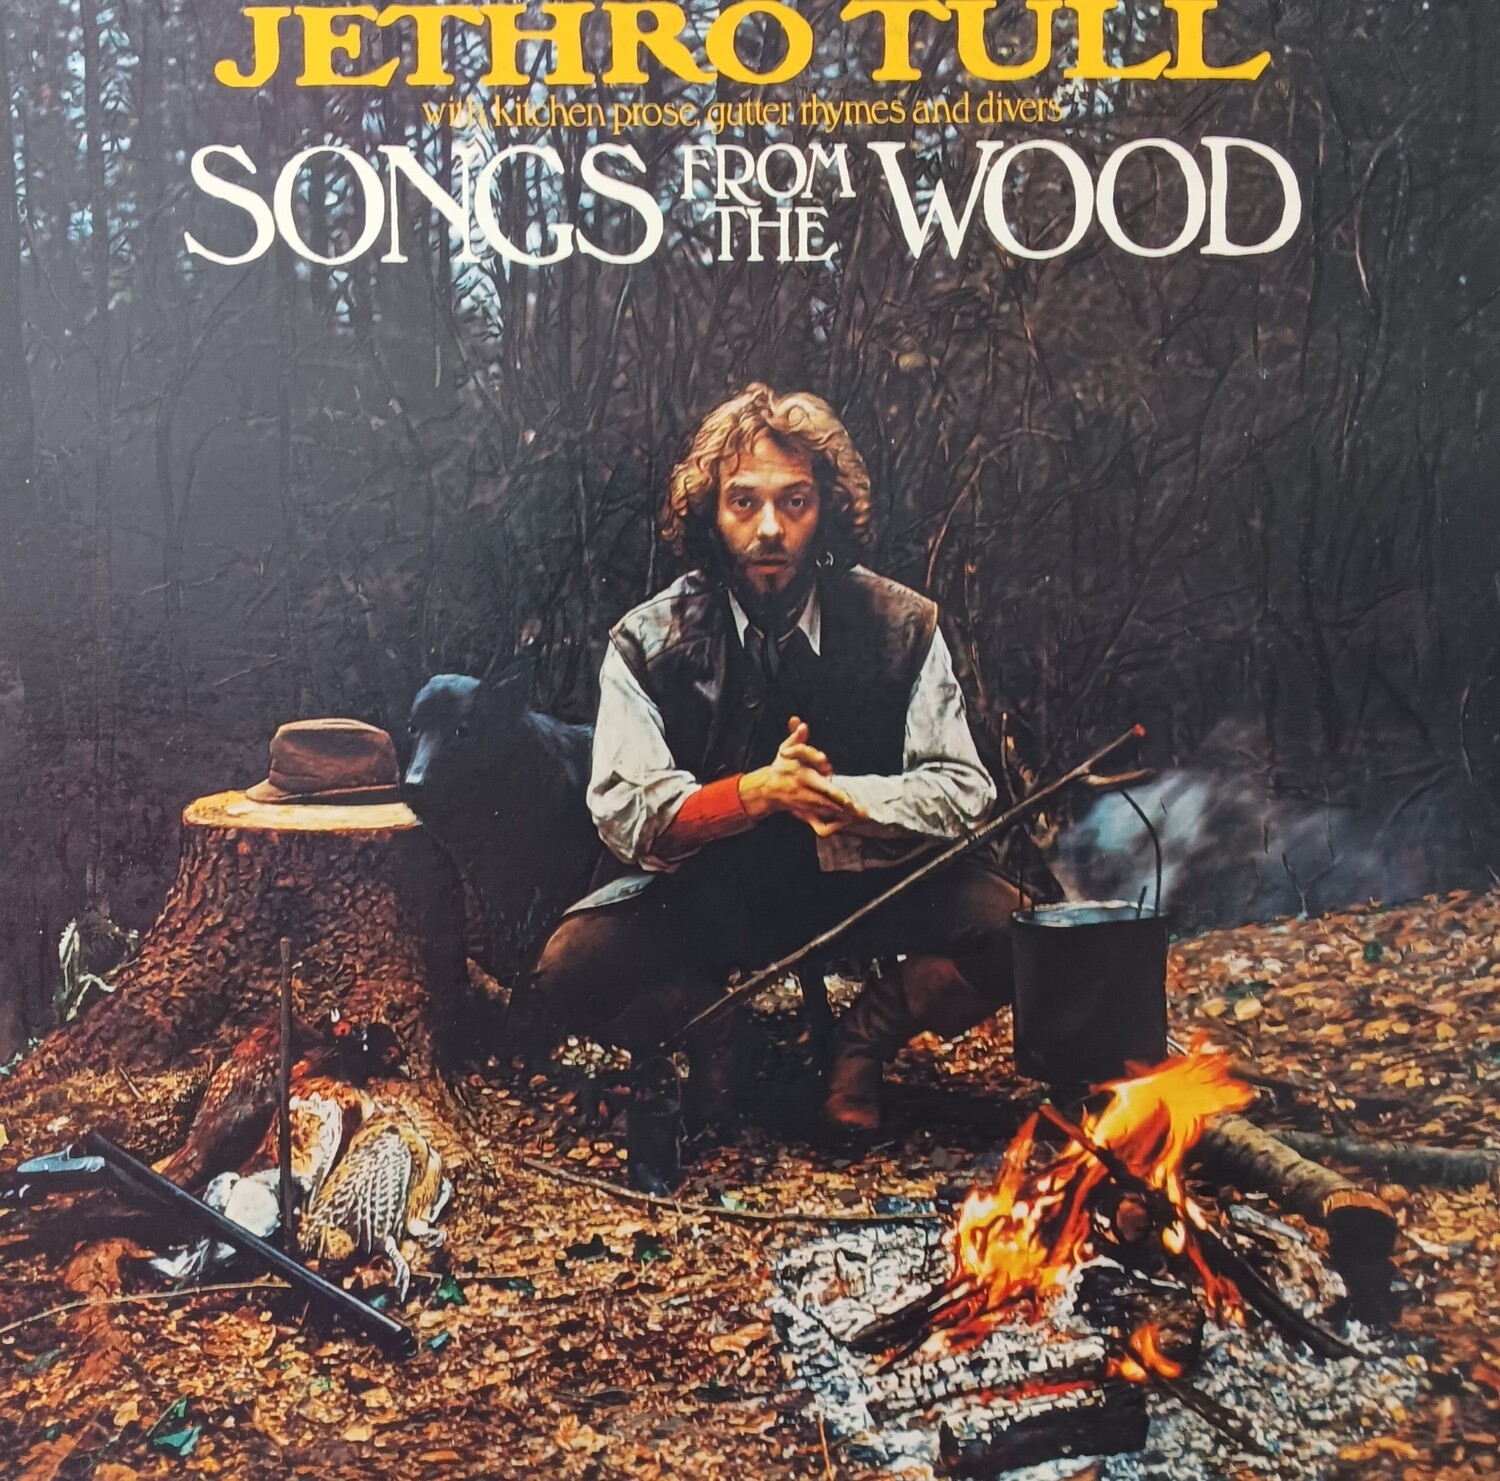 JETHRO TULL - Songs from the wood